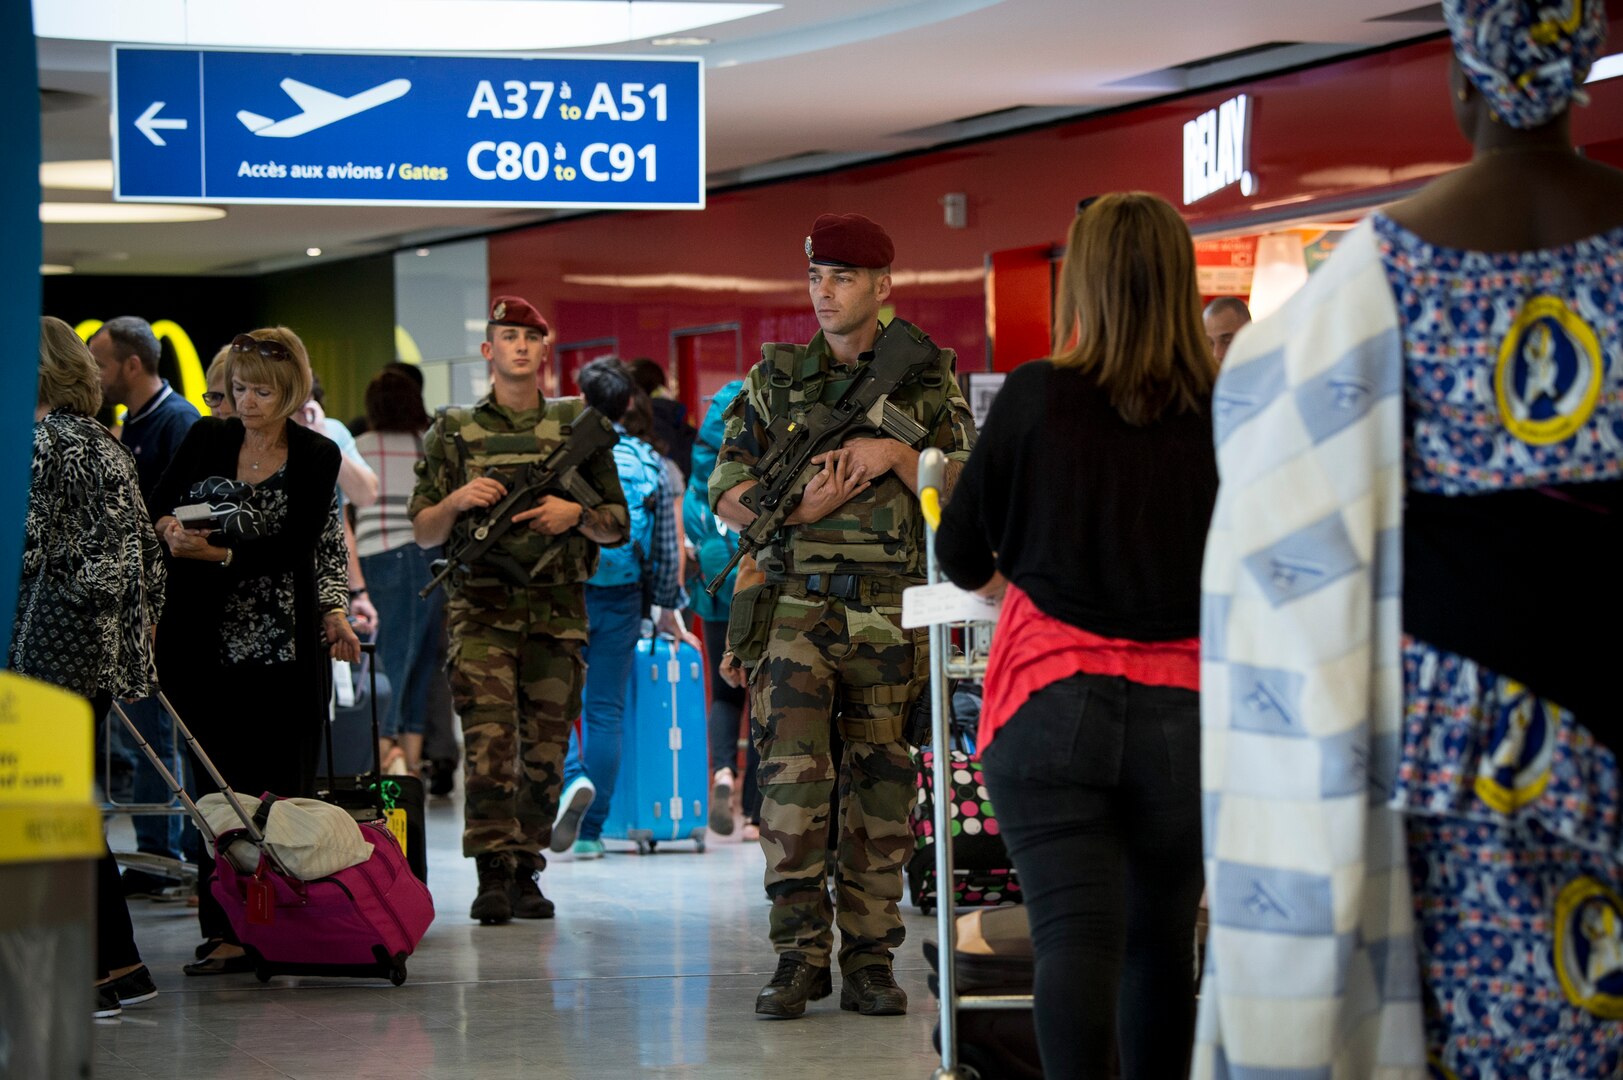 French soldiers provide security at an airport in France as part of Operation Sentinelle. About 13,000 French service members are helping protect France against the threat of extremists. French Ministry of Defense photo